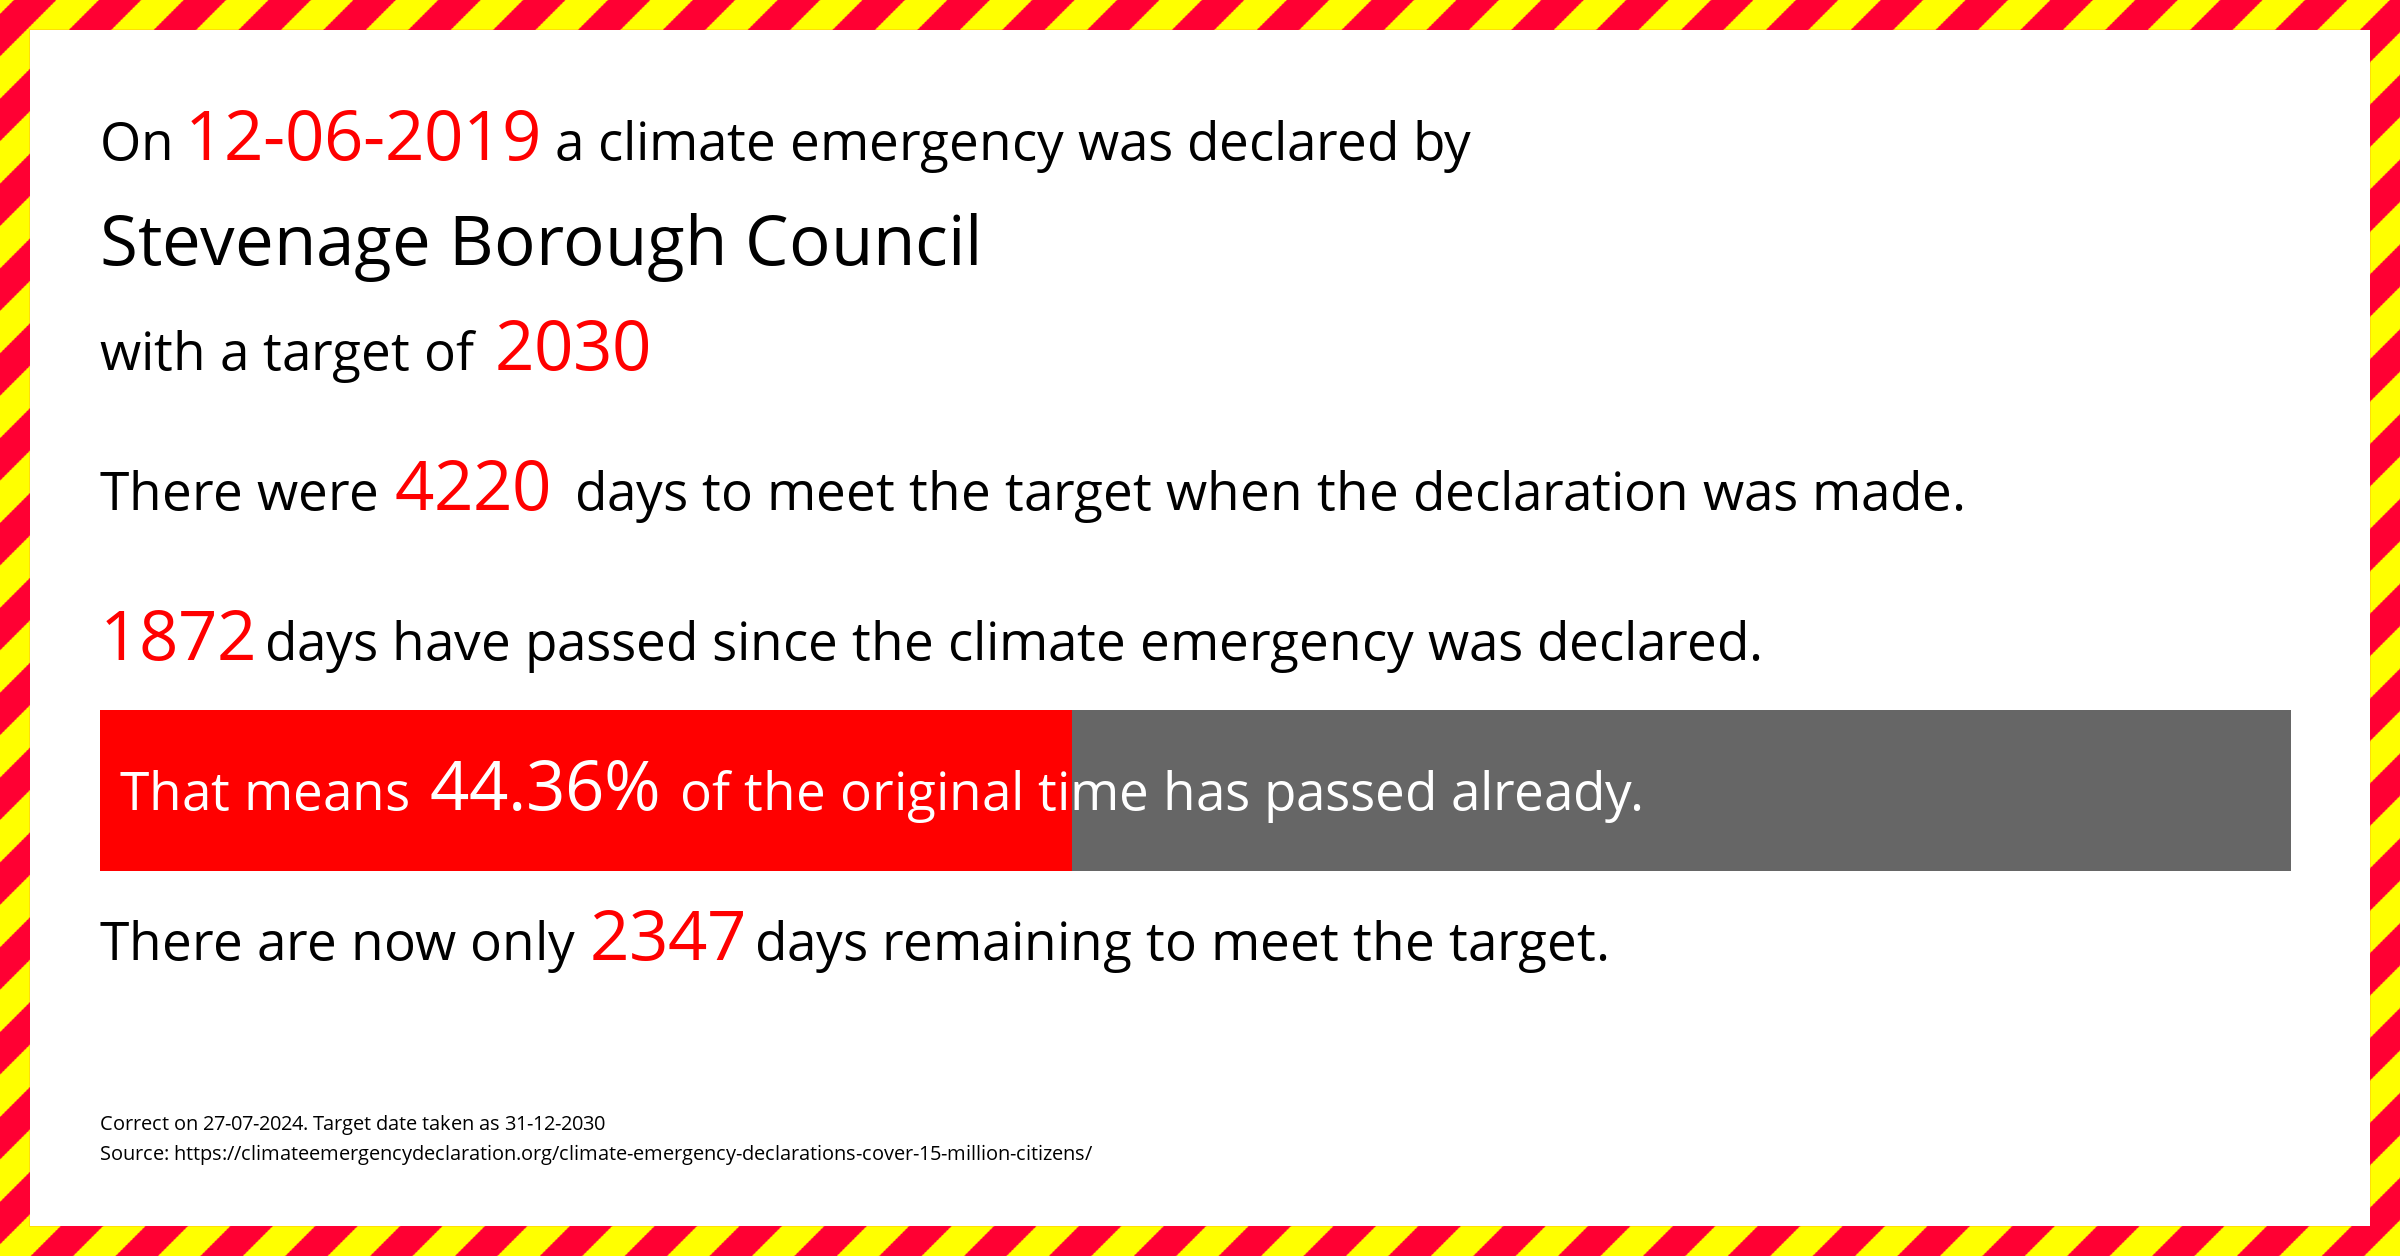 Stevenage Borough Council declared a Climate emergency on Wednesday 12th June 2019, with a target of 2030.